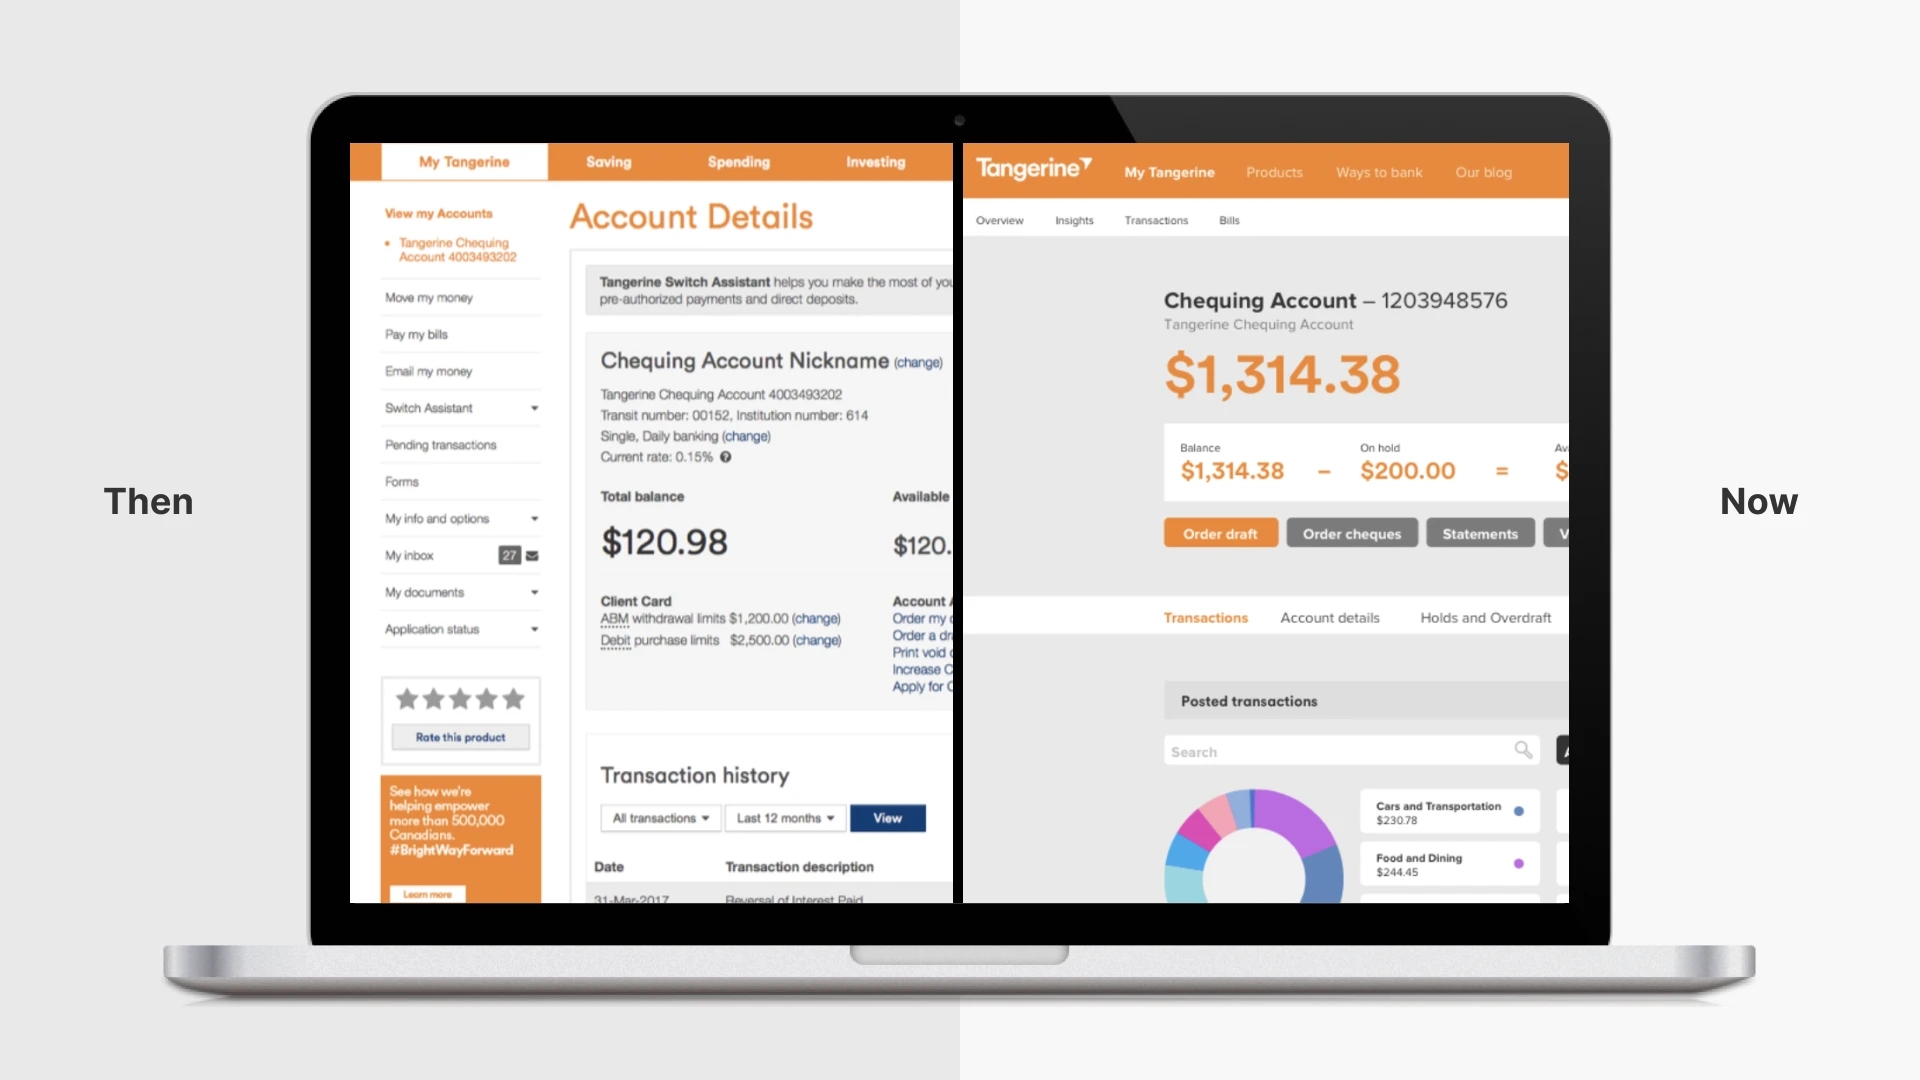 diptych image composited into a laptop screen showing before an after of the tangerine account details page